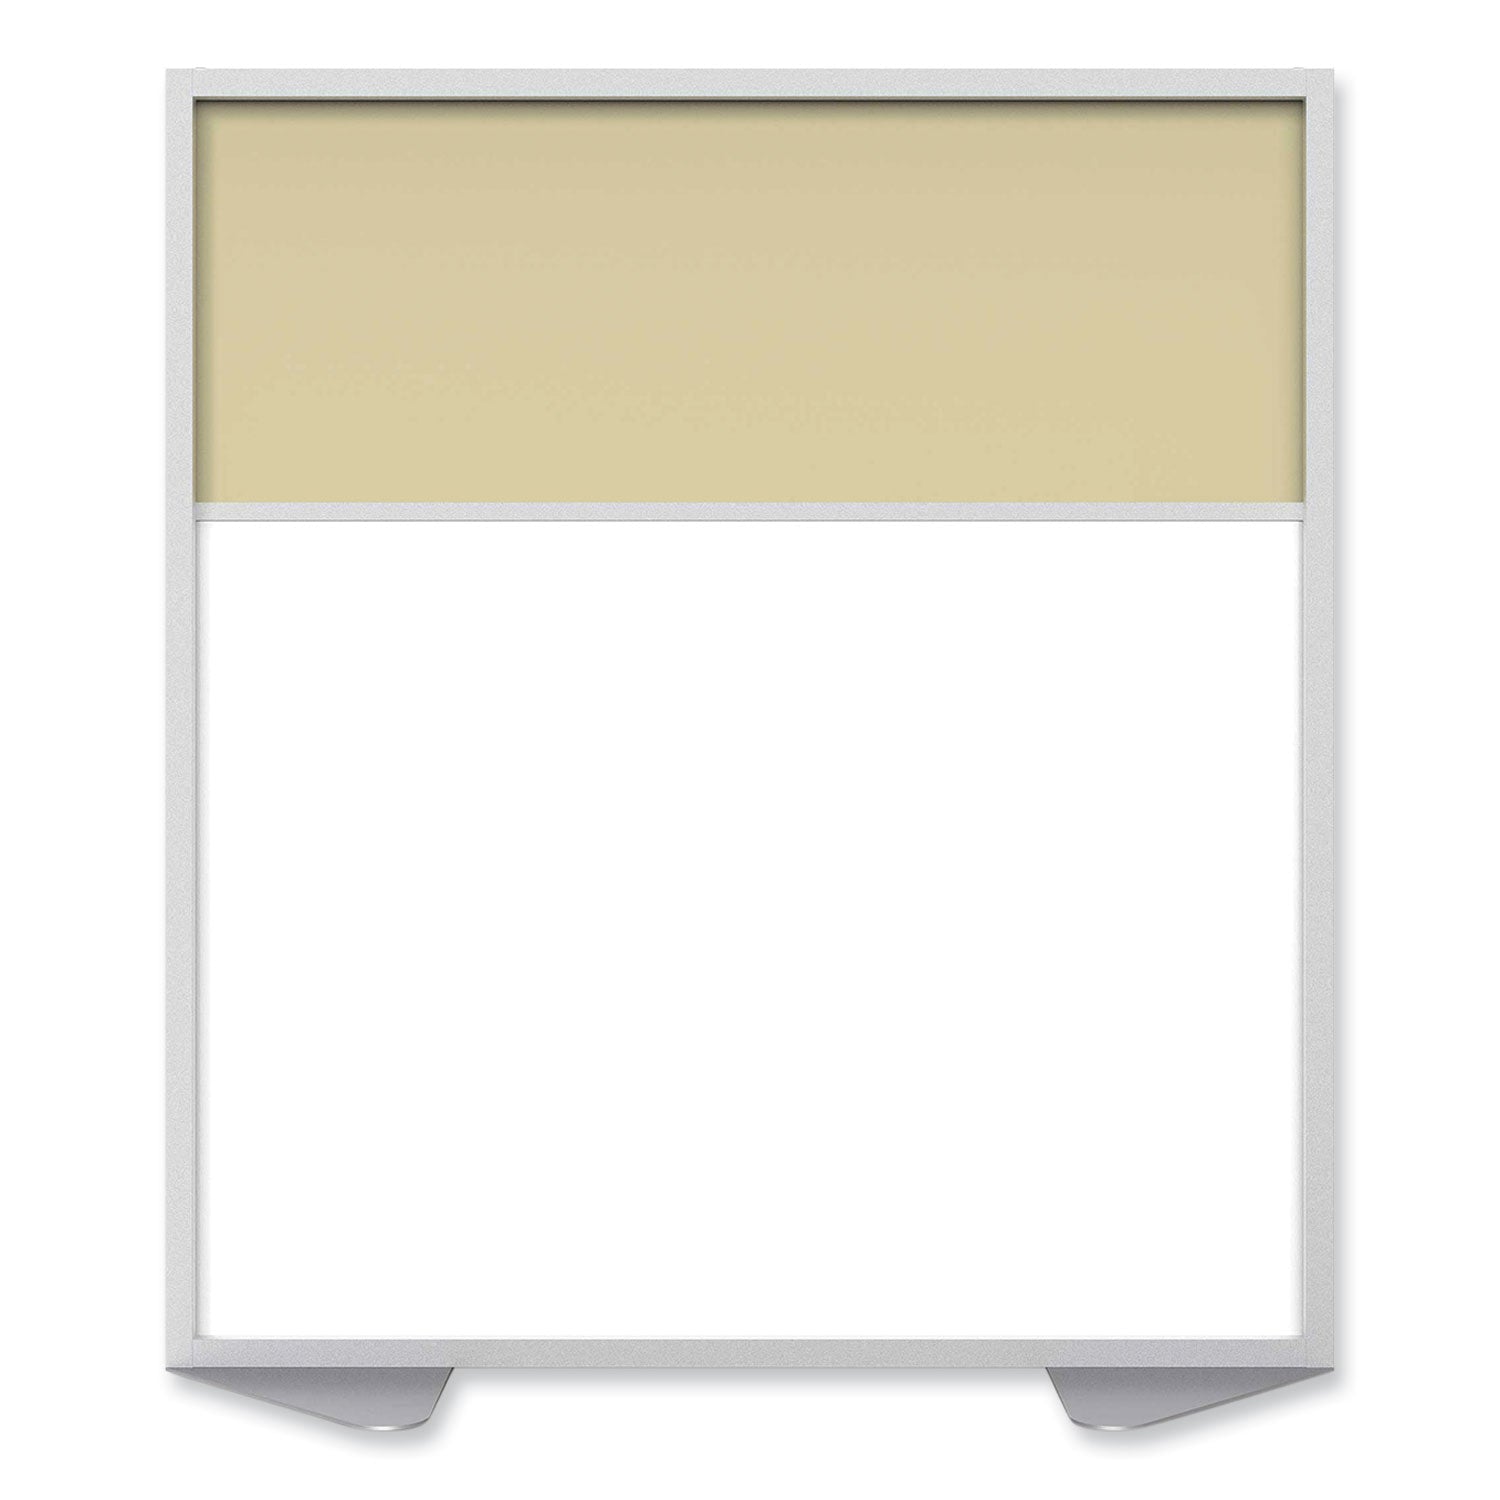 floor-partition-with-aluminum-frame-and-2-split-panel-infill-4806-x-204-x-5386-white-carmel-ships-in-7-10-business-days_ghemp5448208a - 2